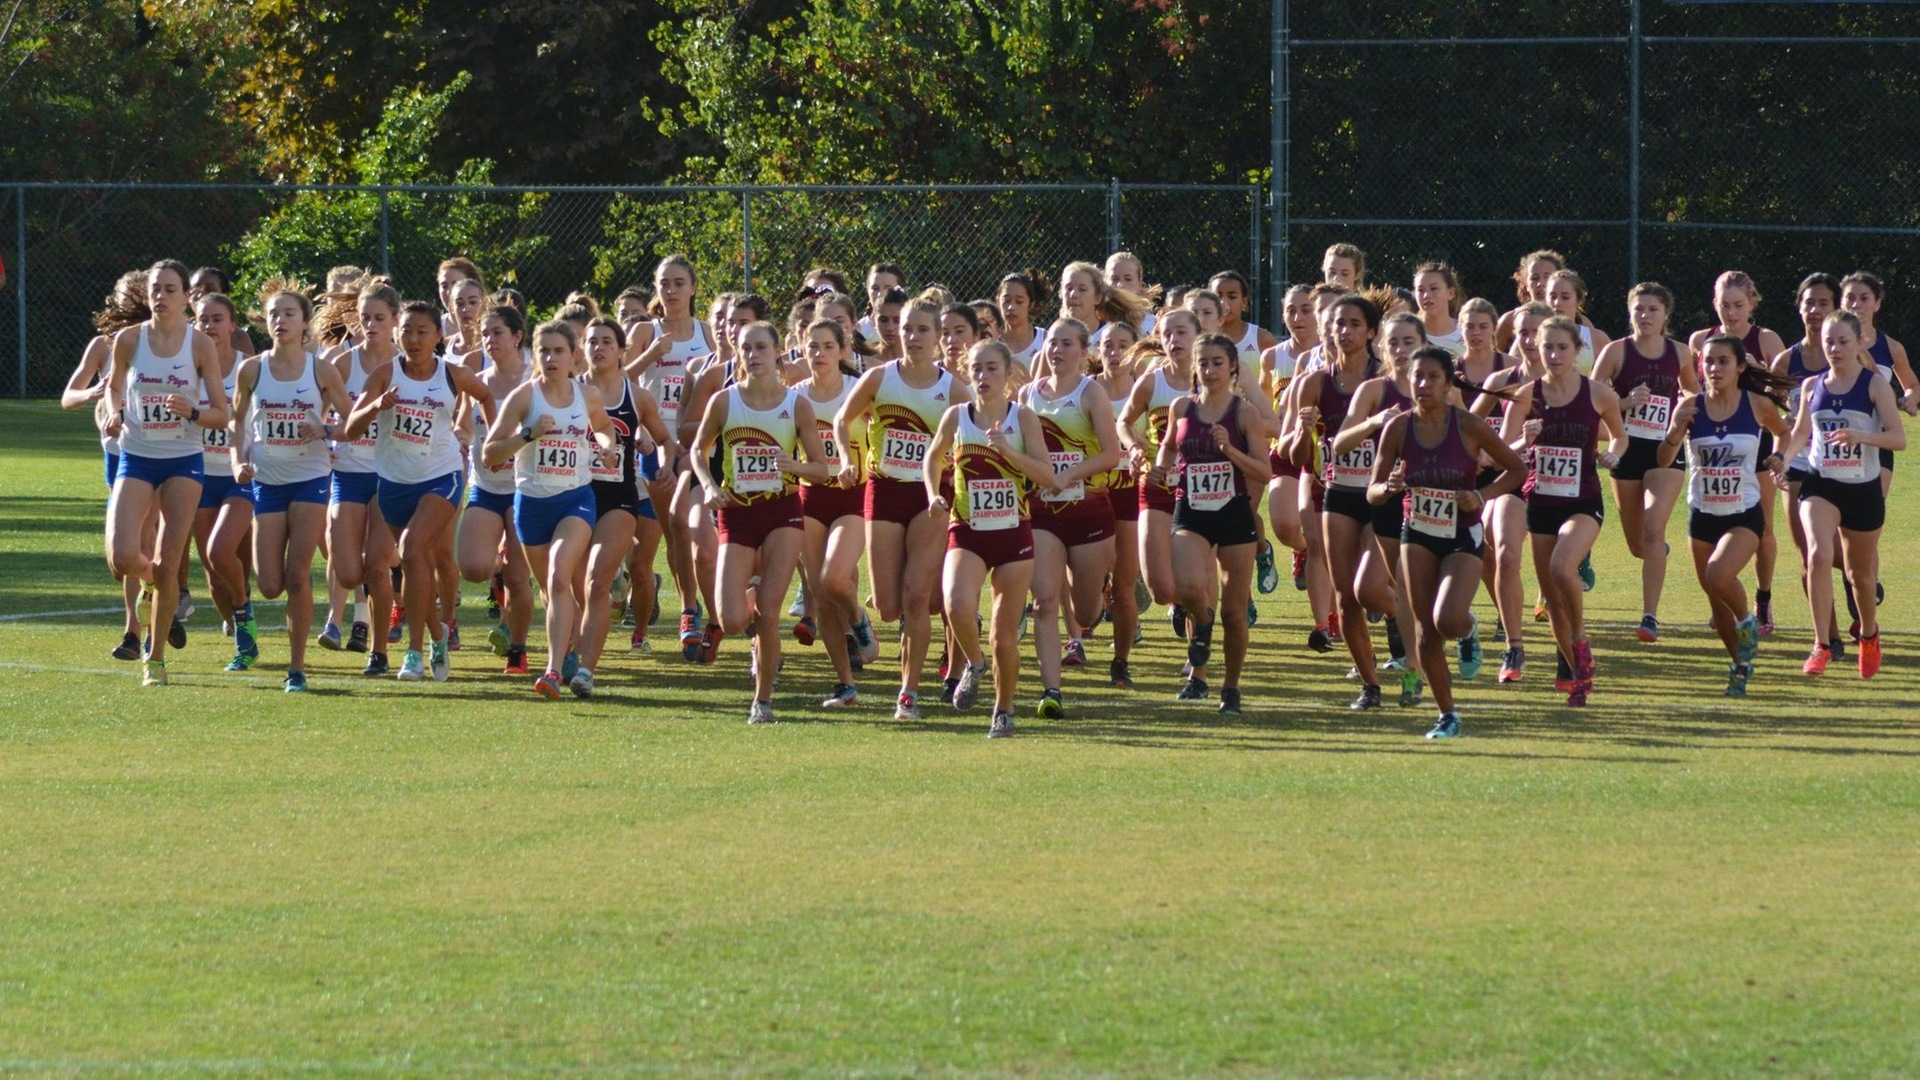 CMS Women's Cross Country at the 2019 SCIAC Championships